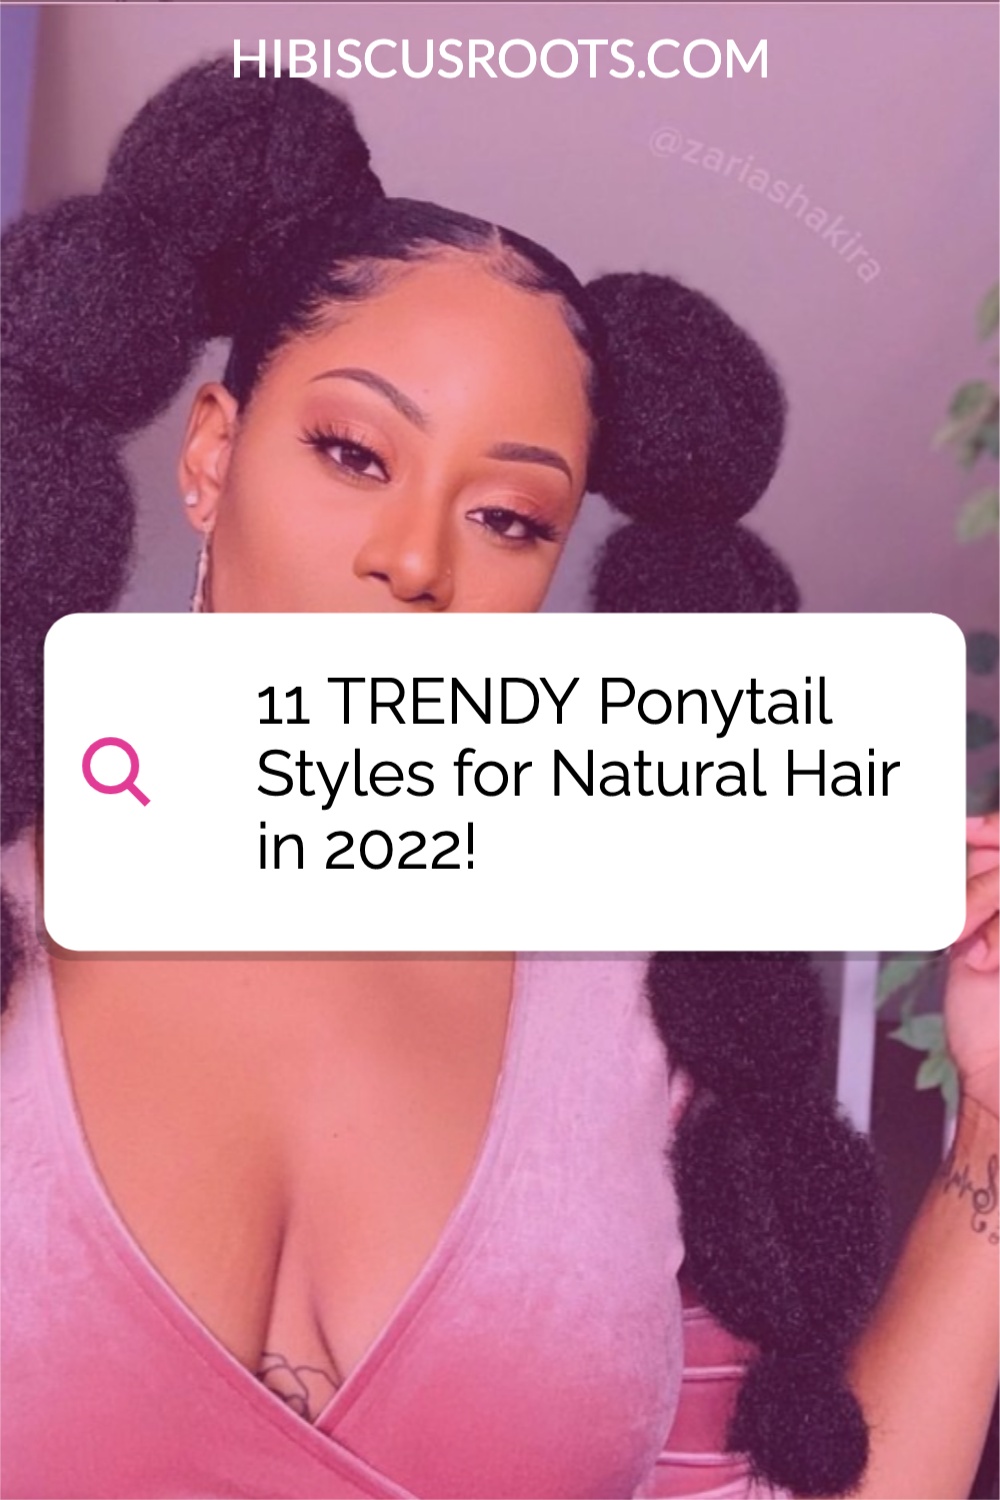 11 Trendy Natural Hair Ponytail Styles for 2022!